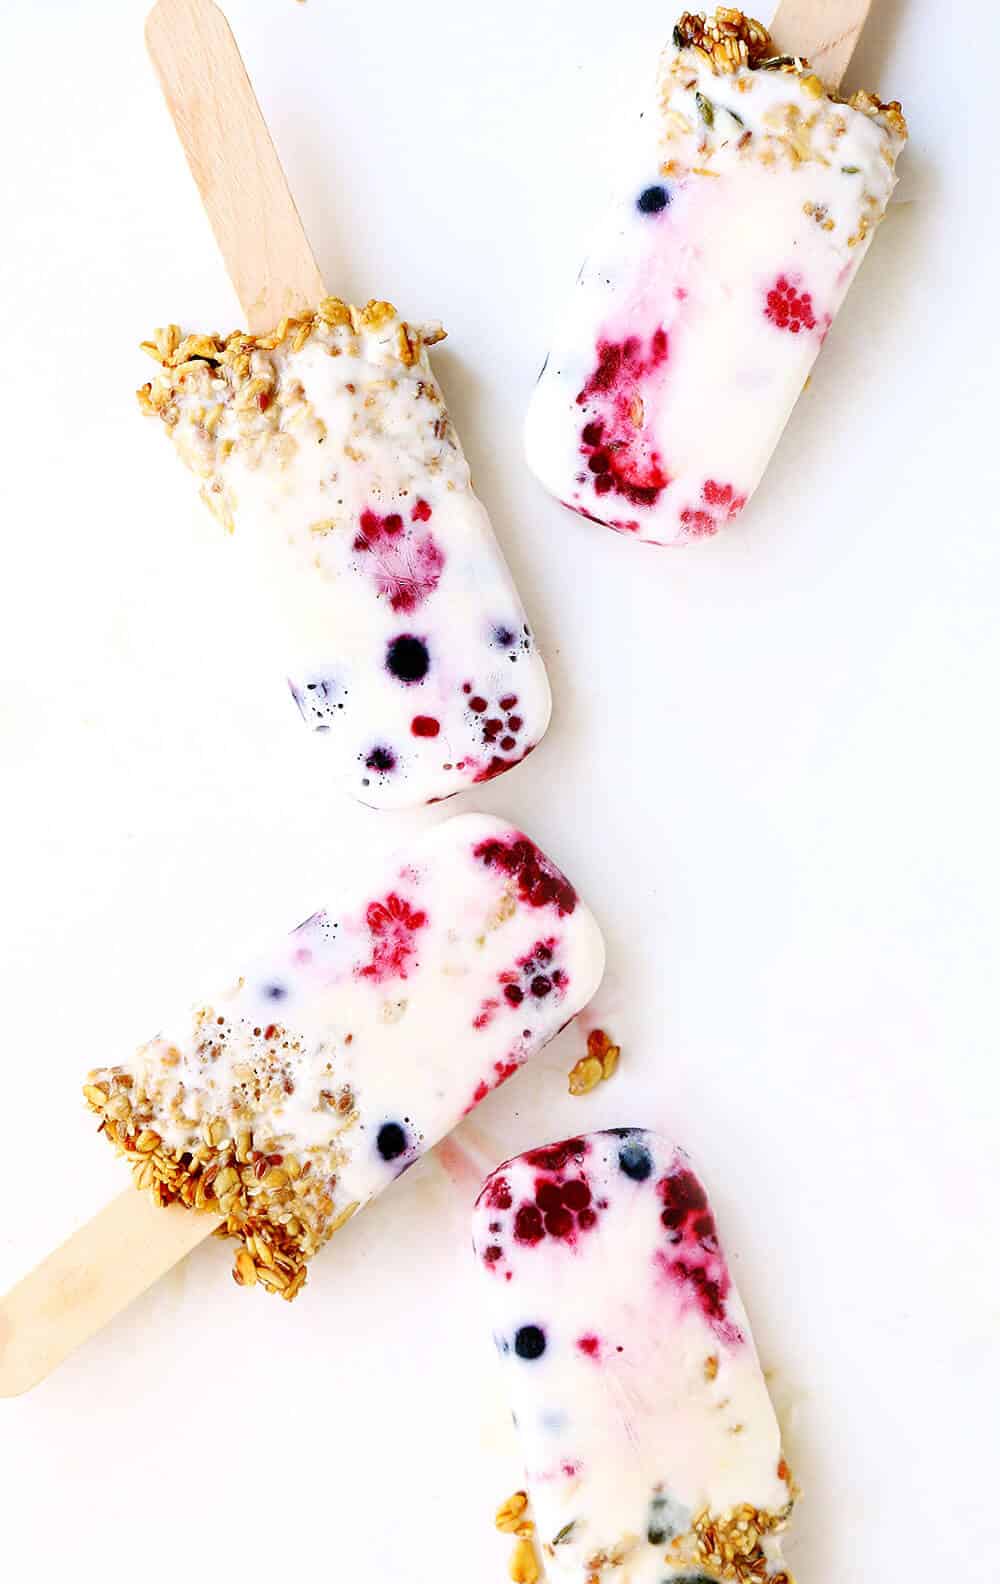 Breakfast popsicles with berries and granola.